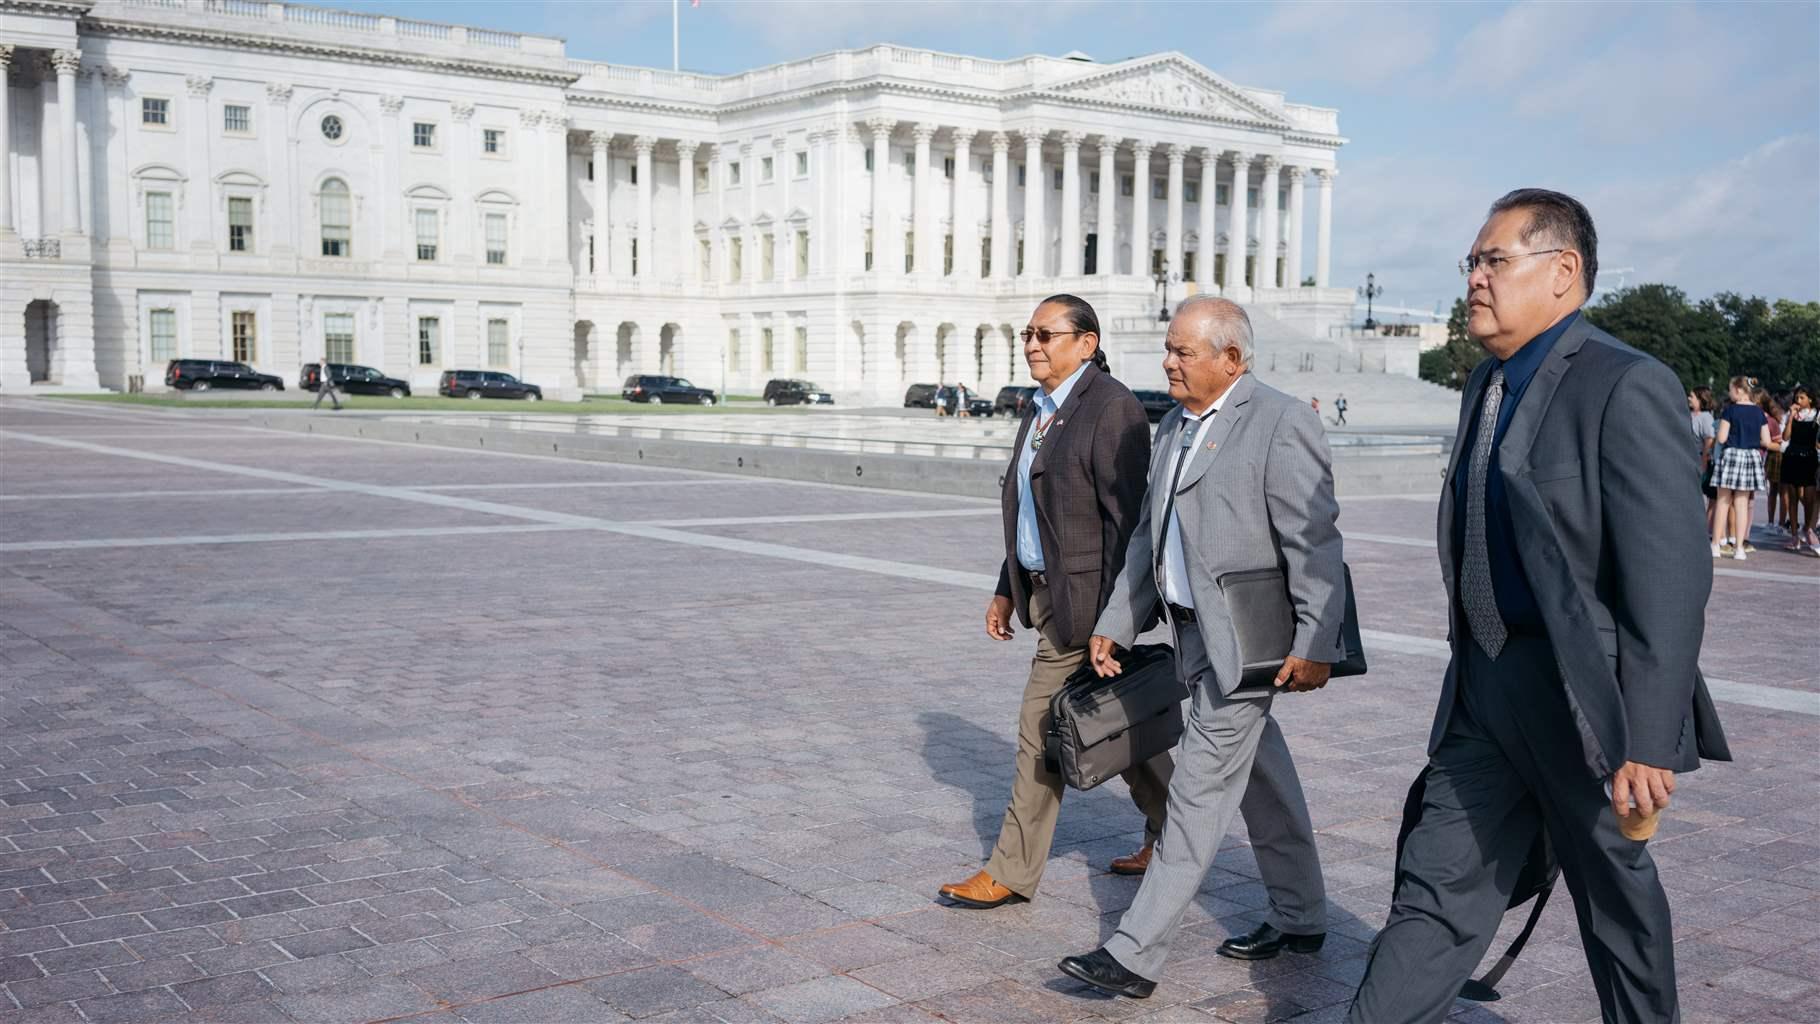 Three men in suits walk across smooth, symmetrical, reddish-gray pavers with the U.S. Capitol, a three-story white marble building, in the background. A line of black SUVs sits in front of the building, the façade of which includes ornate features, including tall columns. 